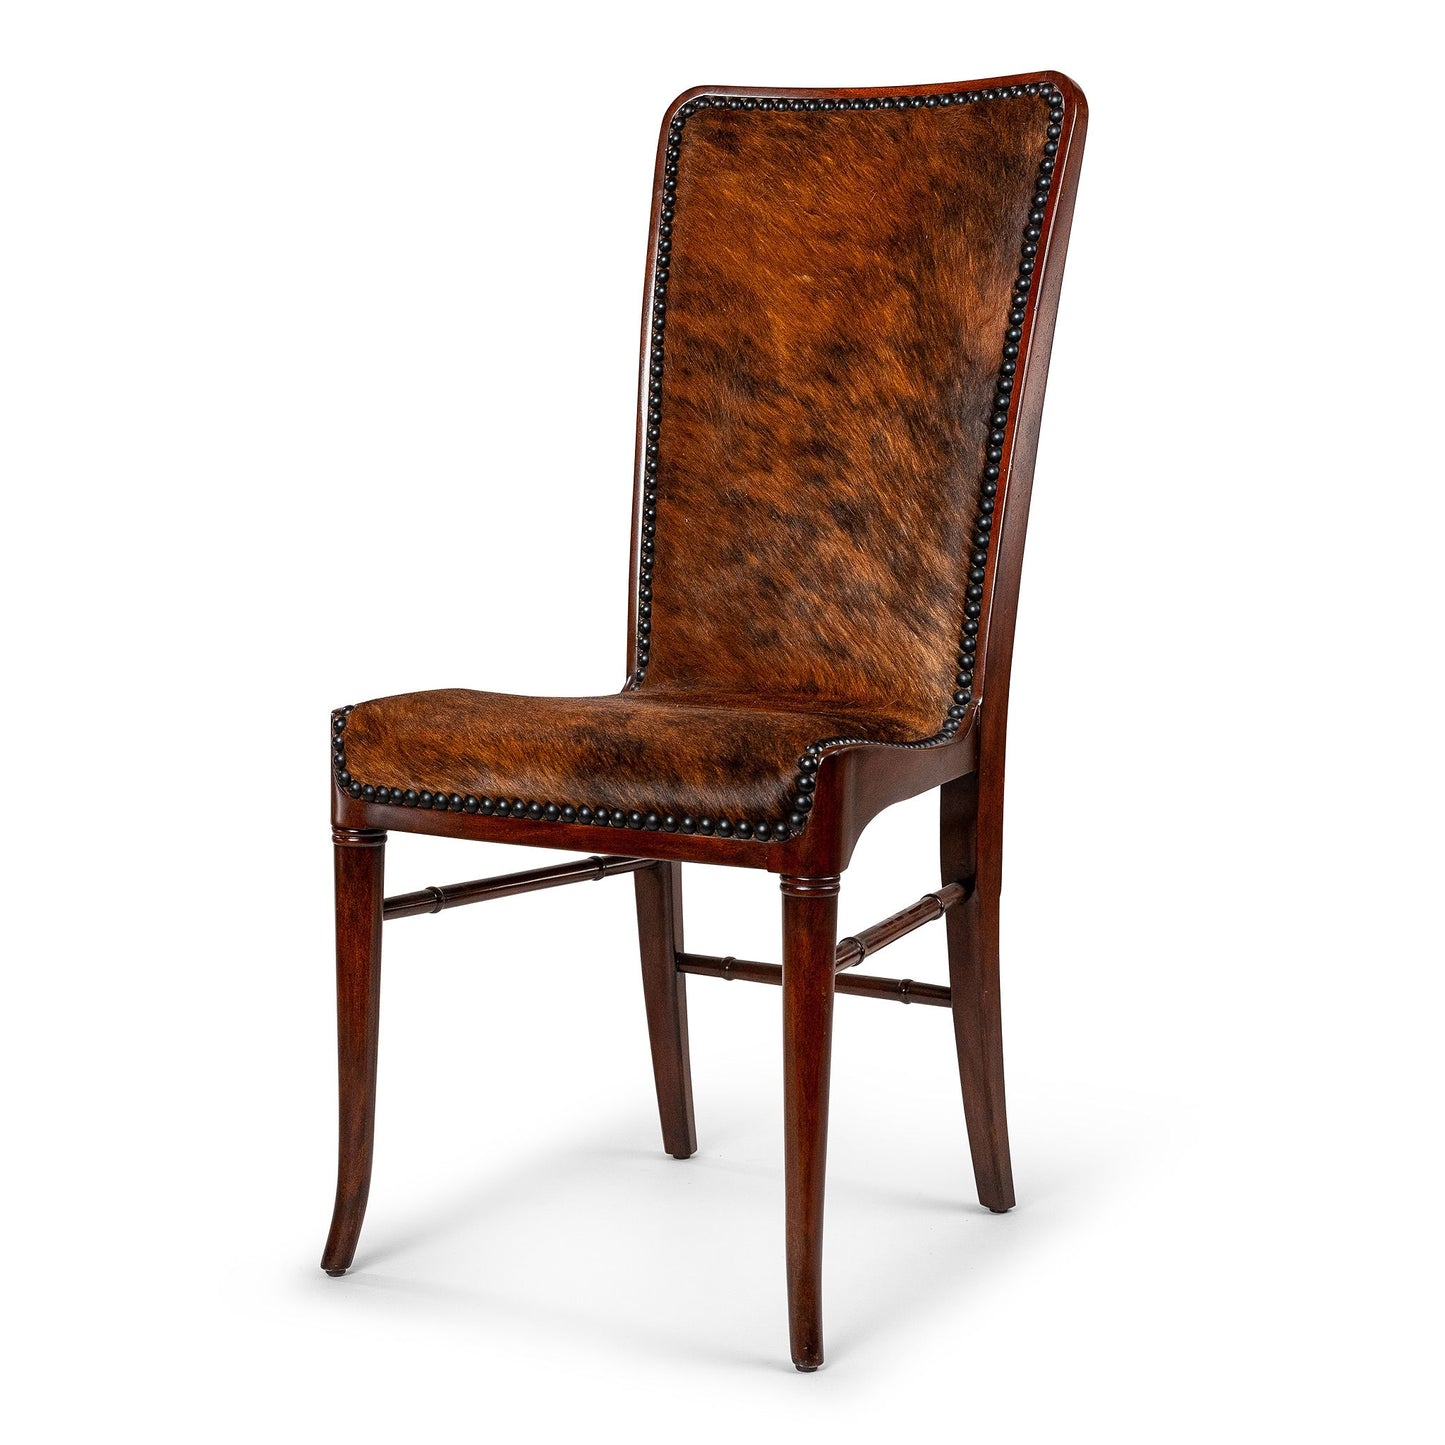 Theodore Alexander All Hide High Back Side Chair "The Sweep"